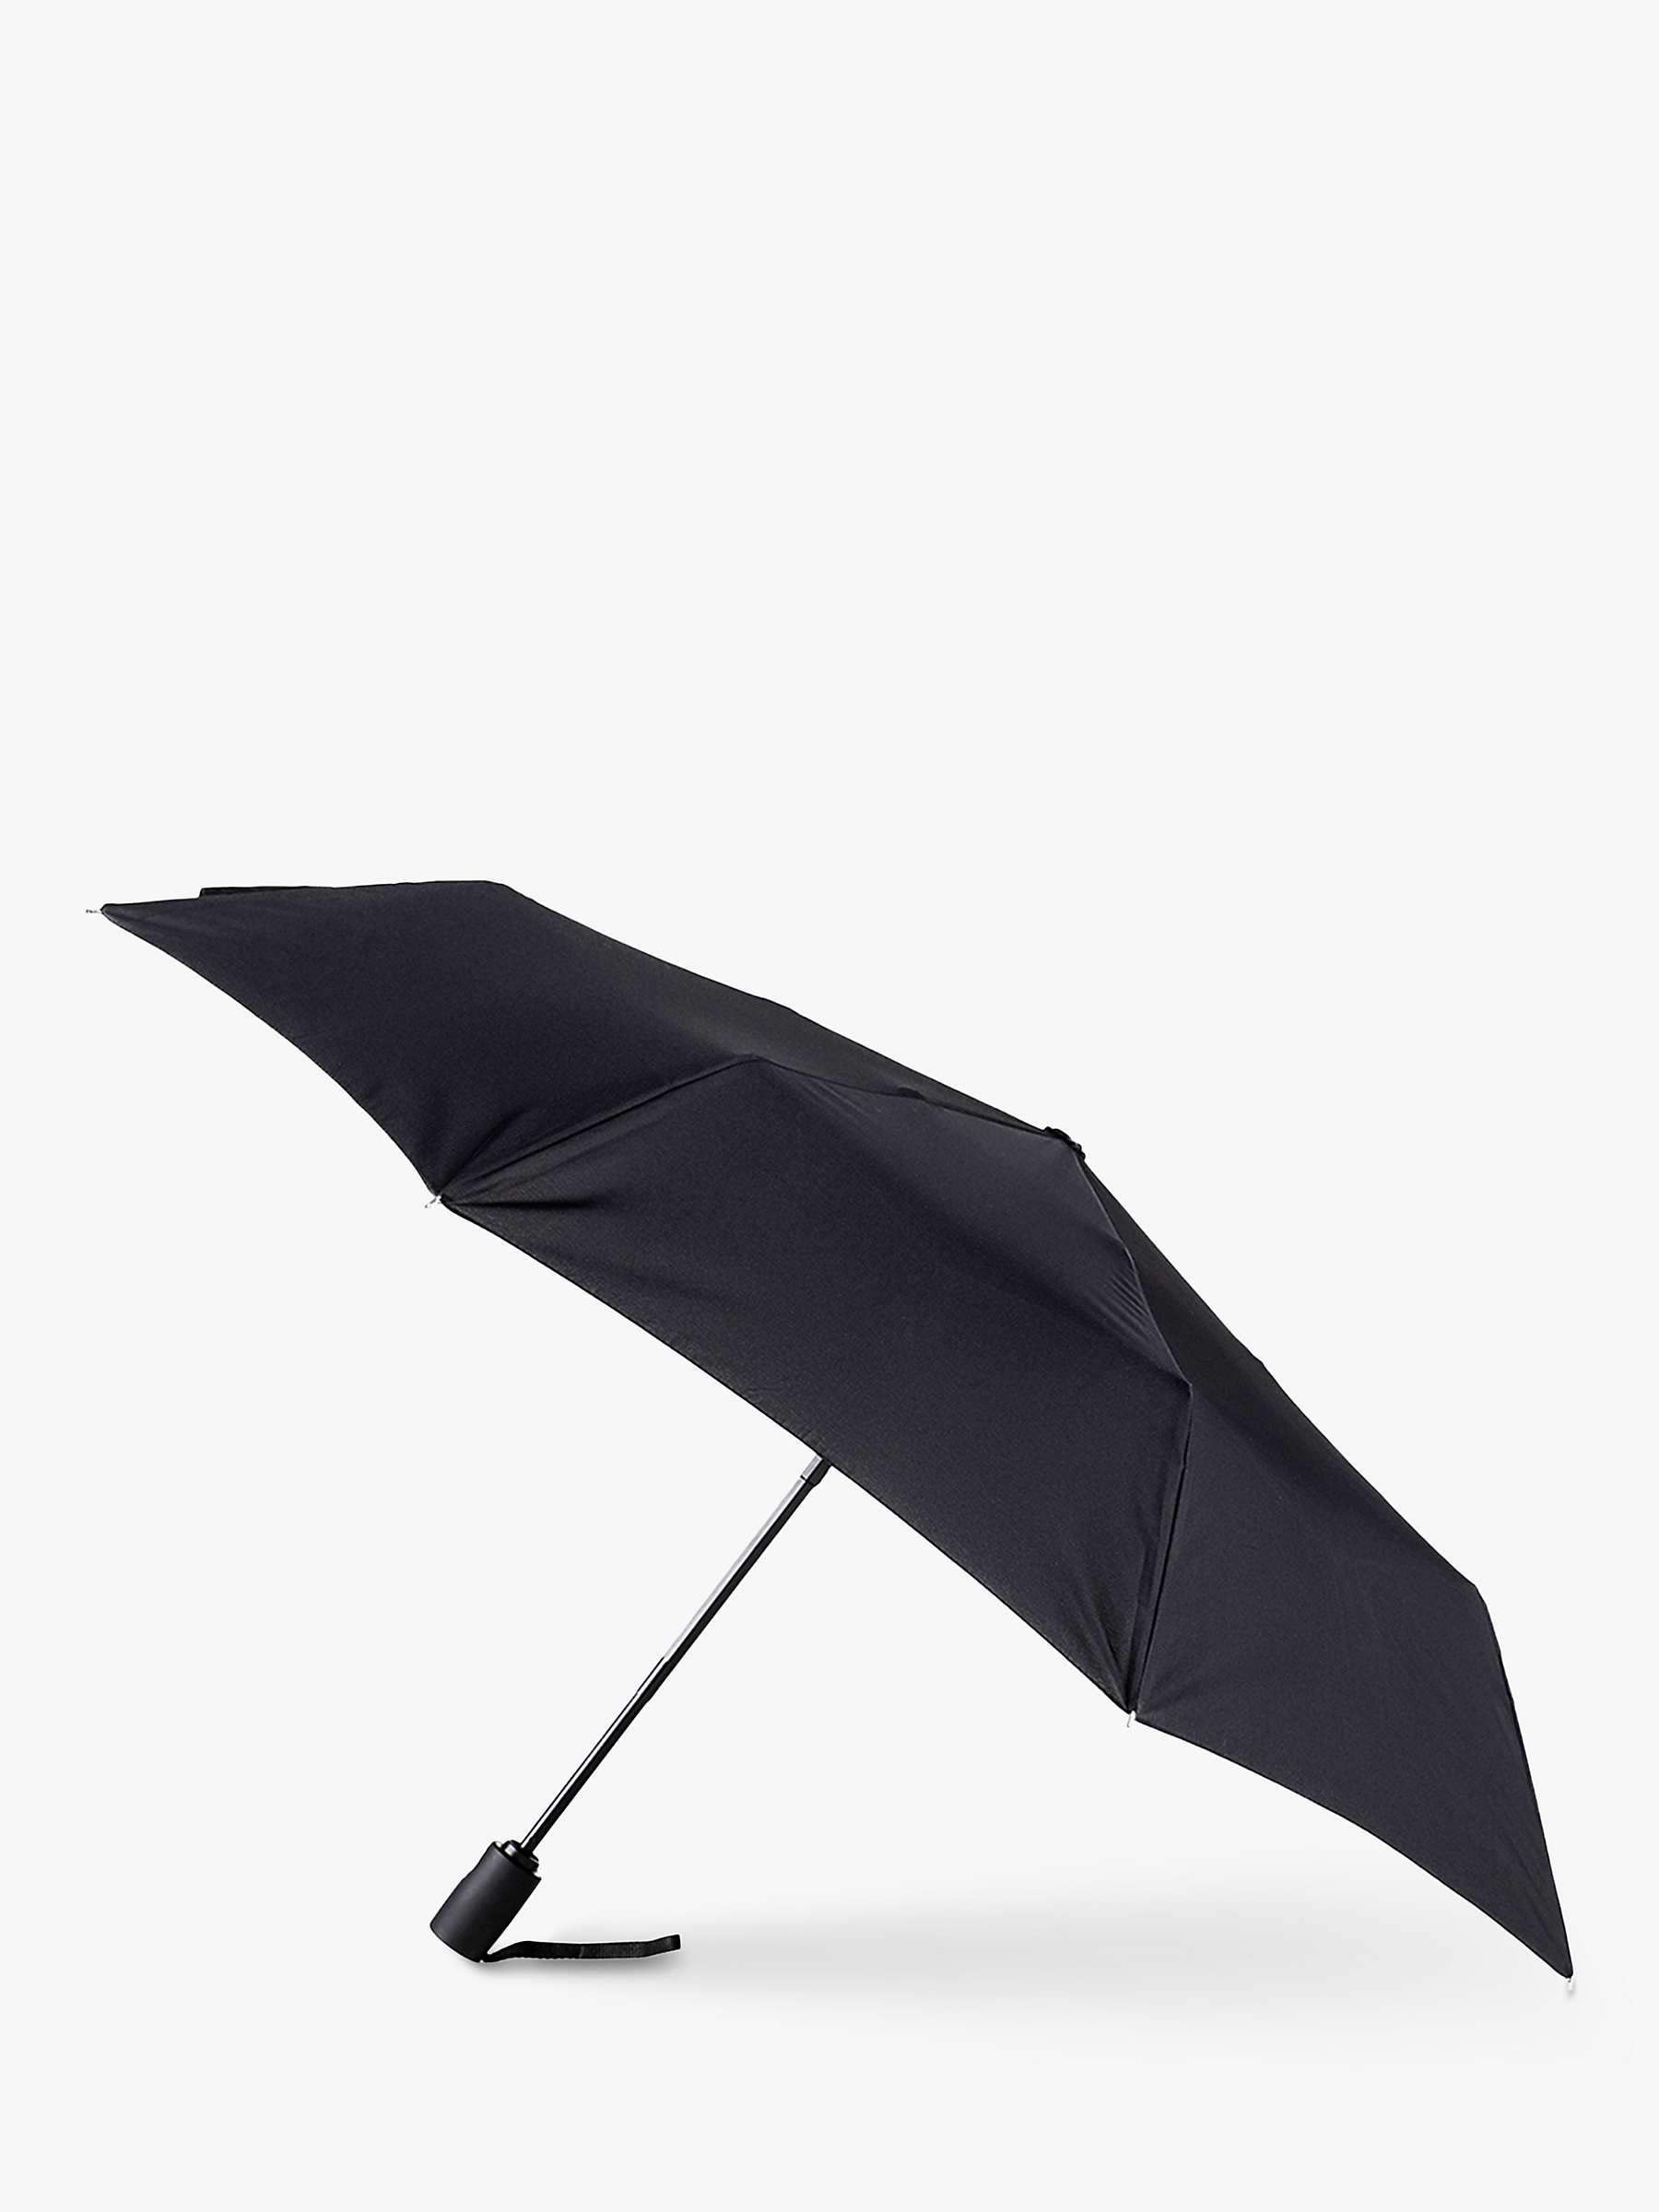 Buy totes Men's Gloves And X-tra Strong Umbrella Gift Set Online at johnlewis.com